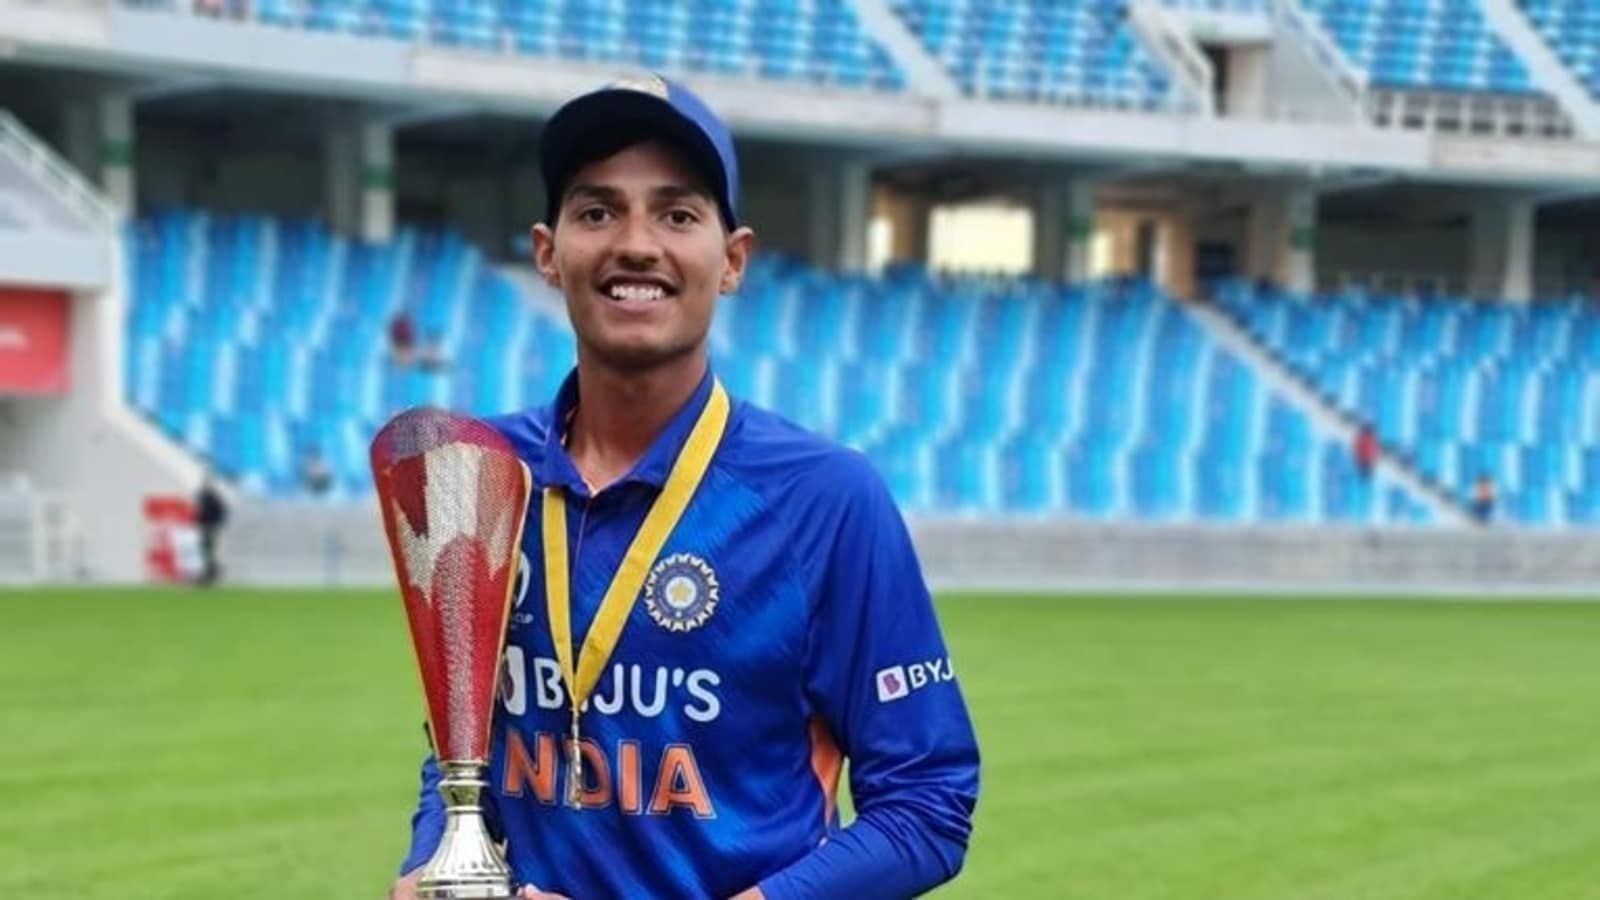 Yash Dhull was also part of the title-winning Indian team in the Under-19 World Cup